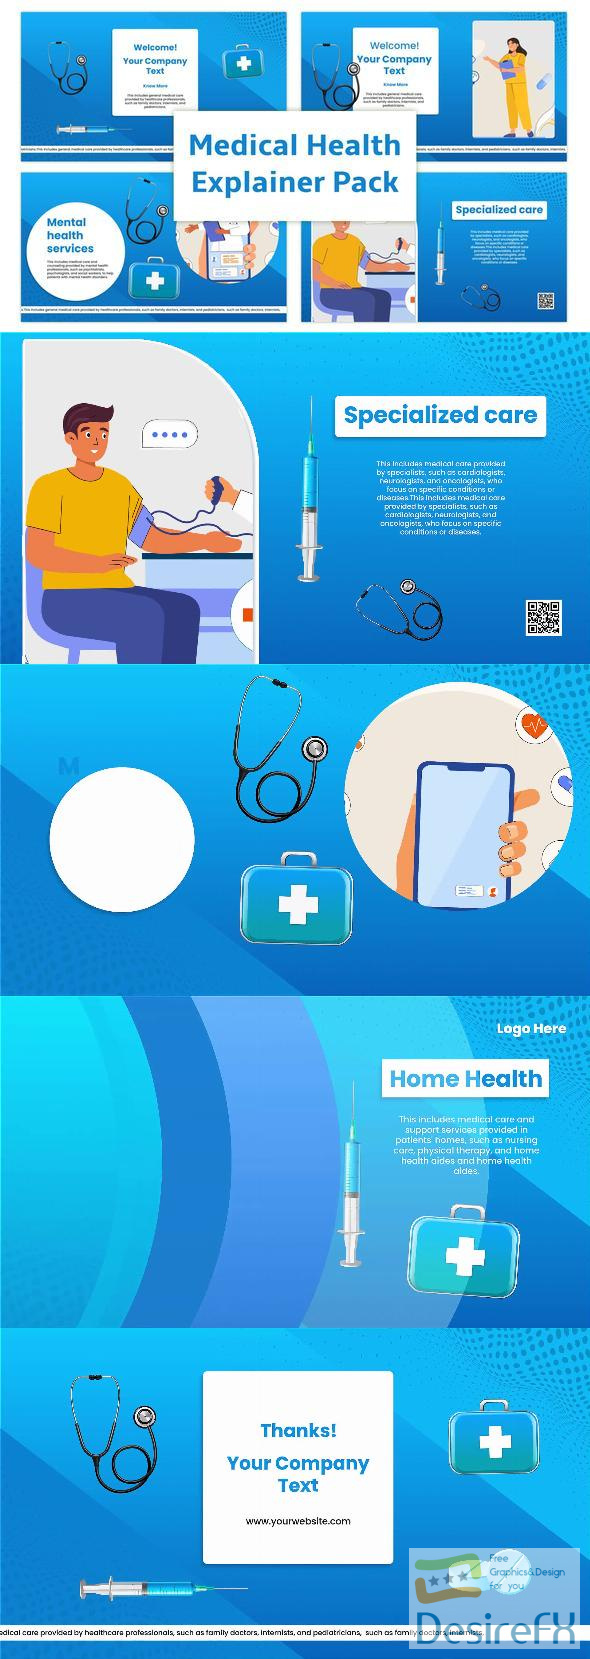 VideoHive After Effects Medical Health Services Explainer Templates 45086651